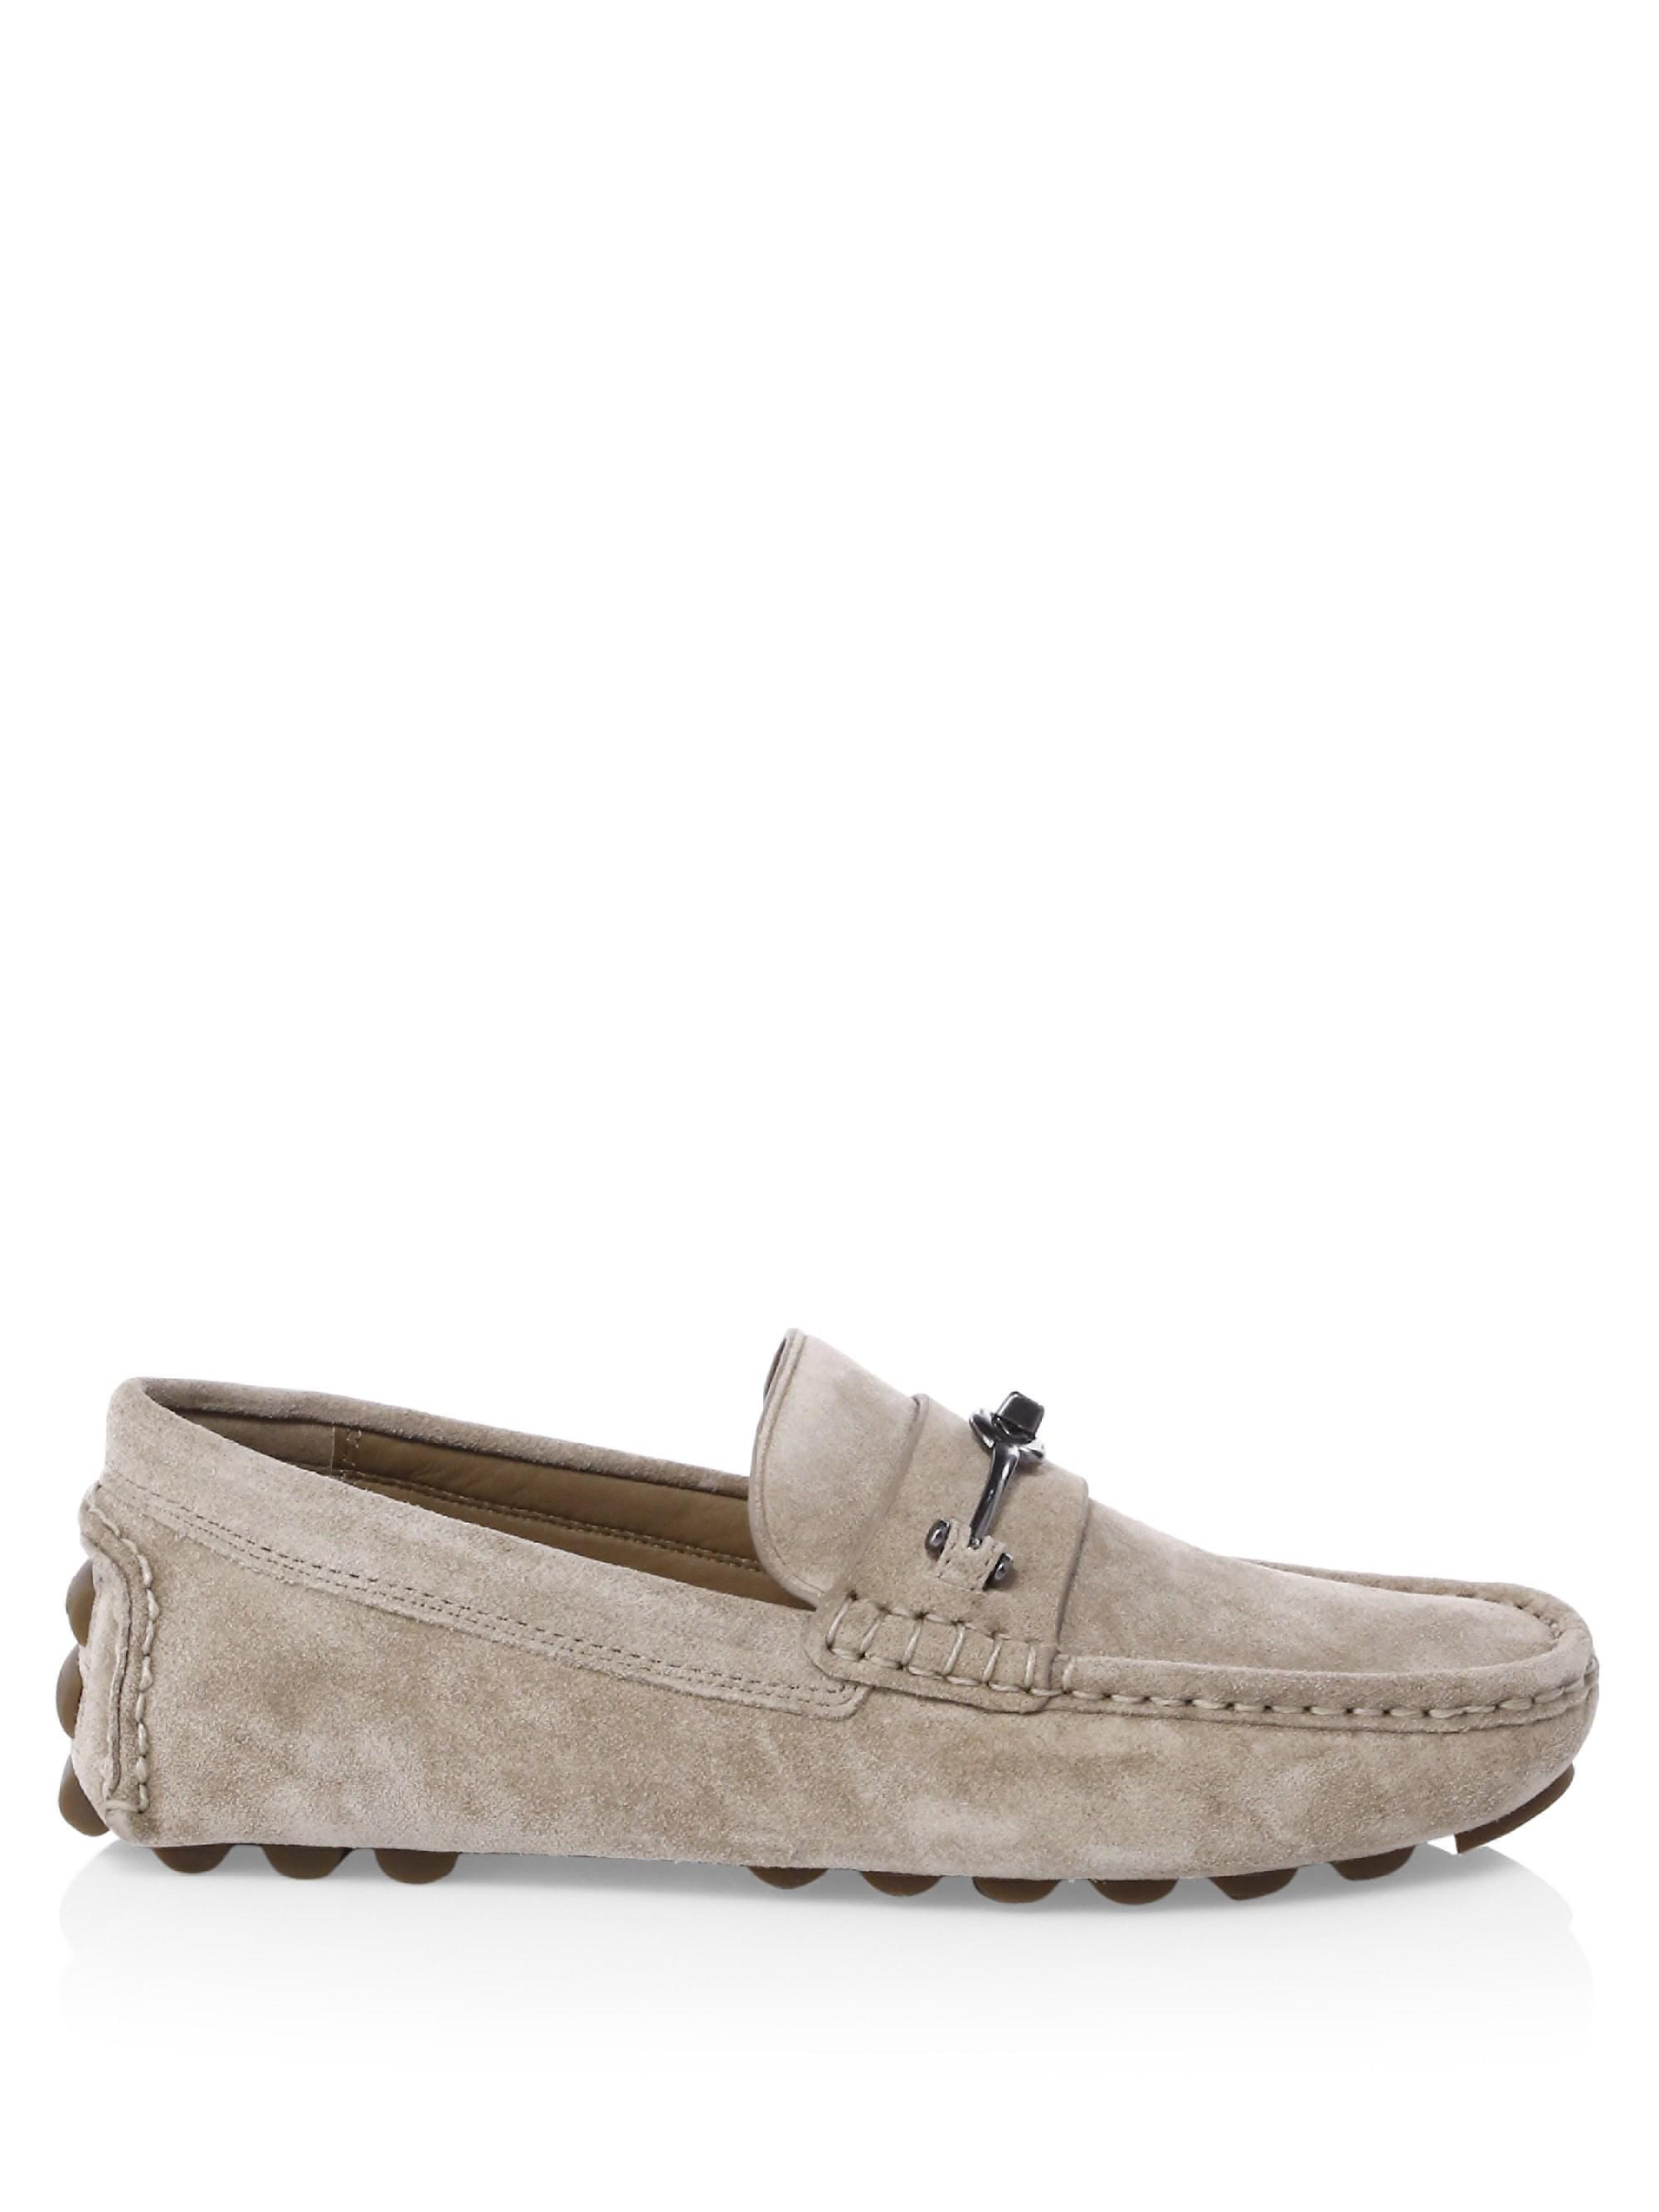 COACH Suede Bit Driver Loafers in Brown for Men - Lyst